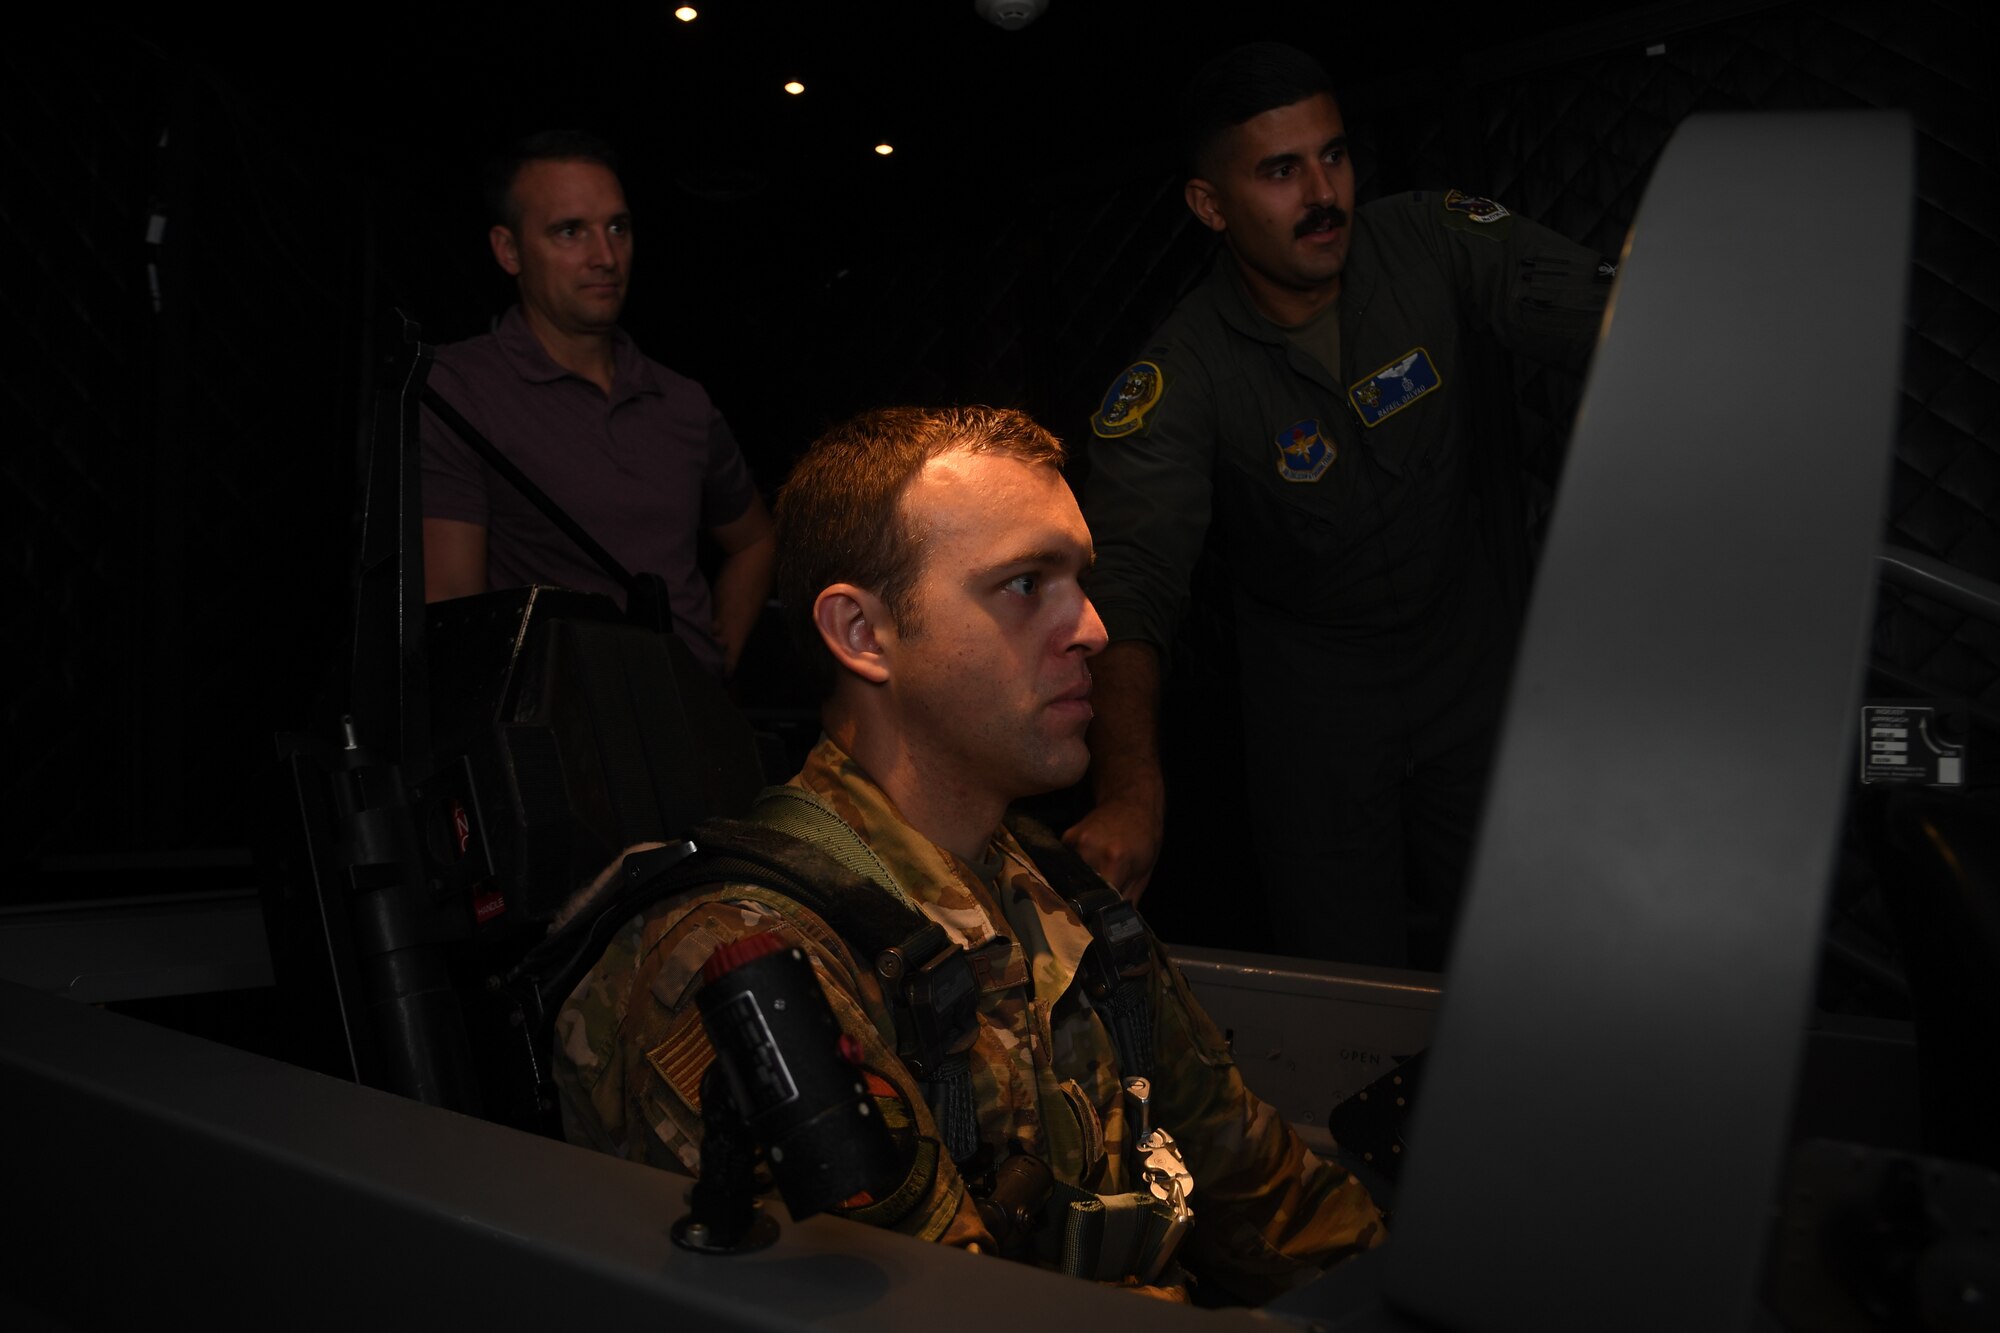 Maj. Bryan Presler learns how to fly a T-6 Texan in the simulator under the instruction of 1Lt. Rafael Galvao